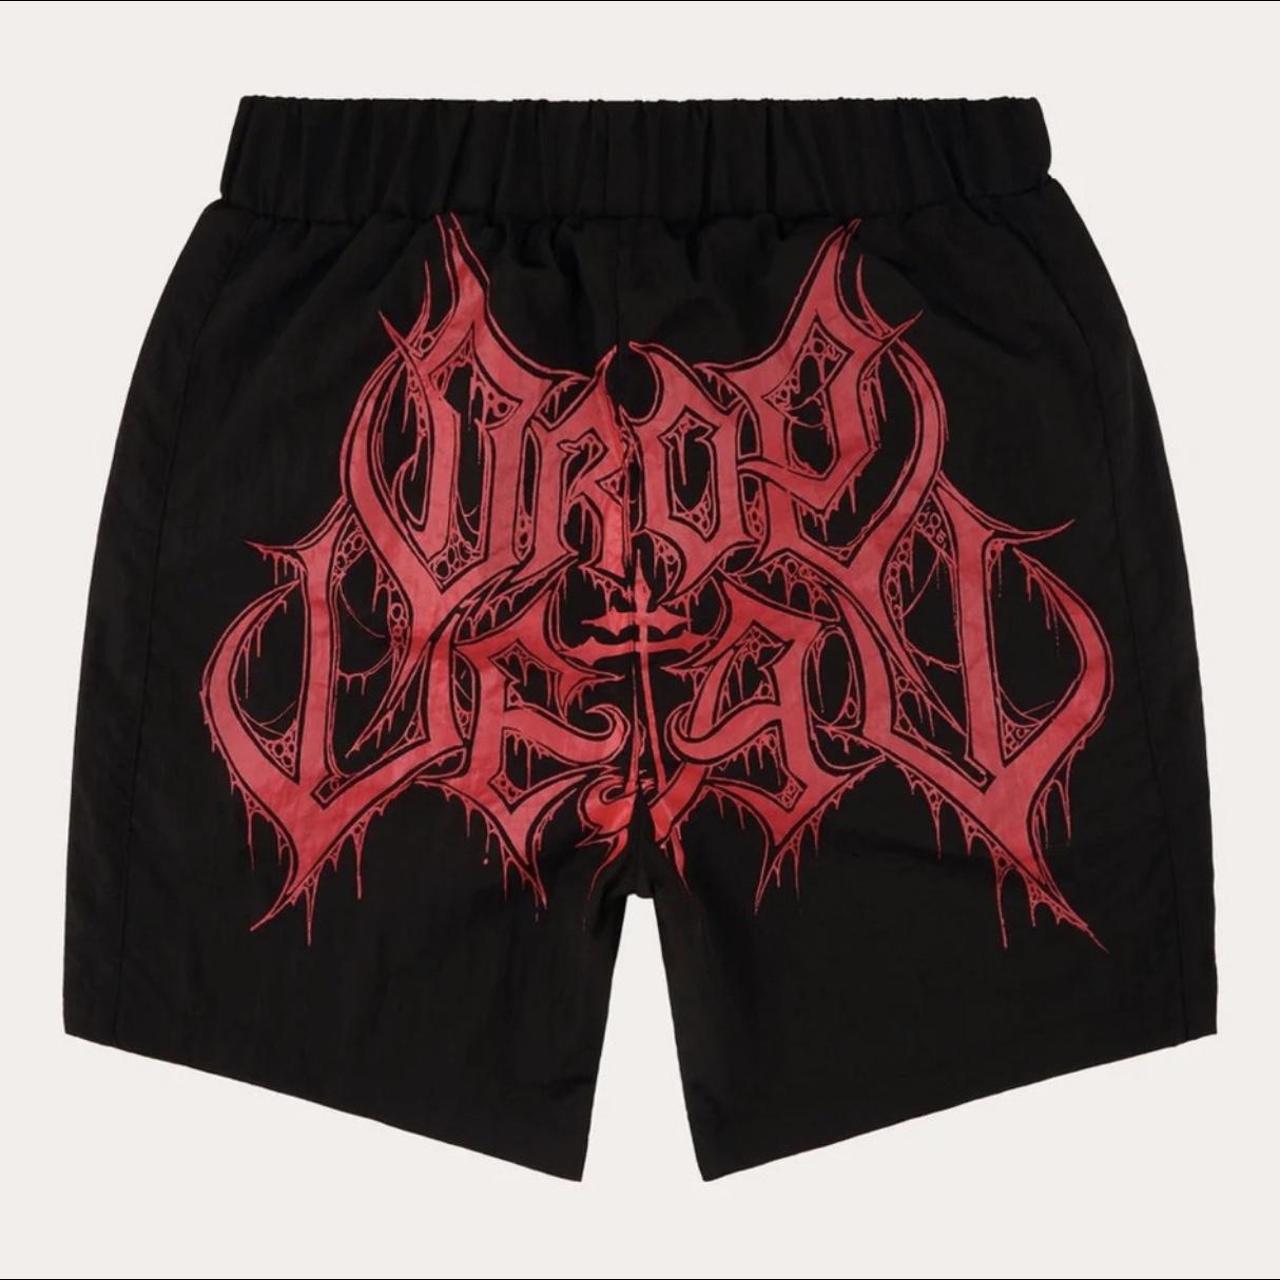 Dropdead Women's Black and Red Shorts